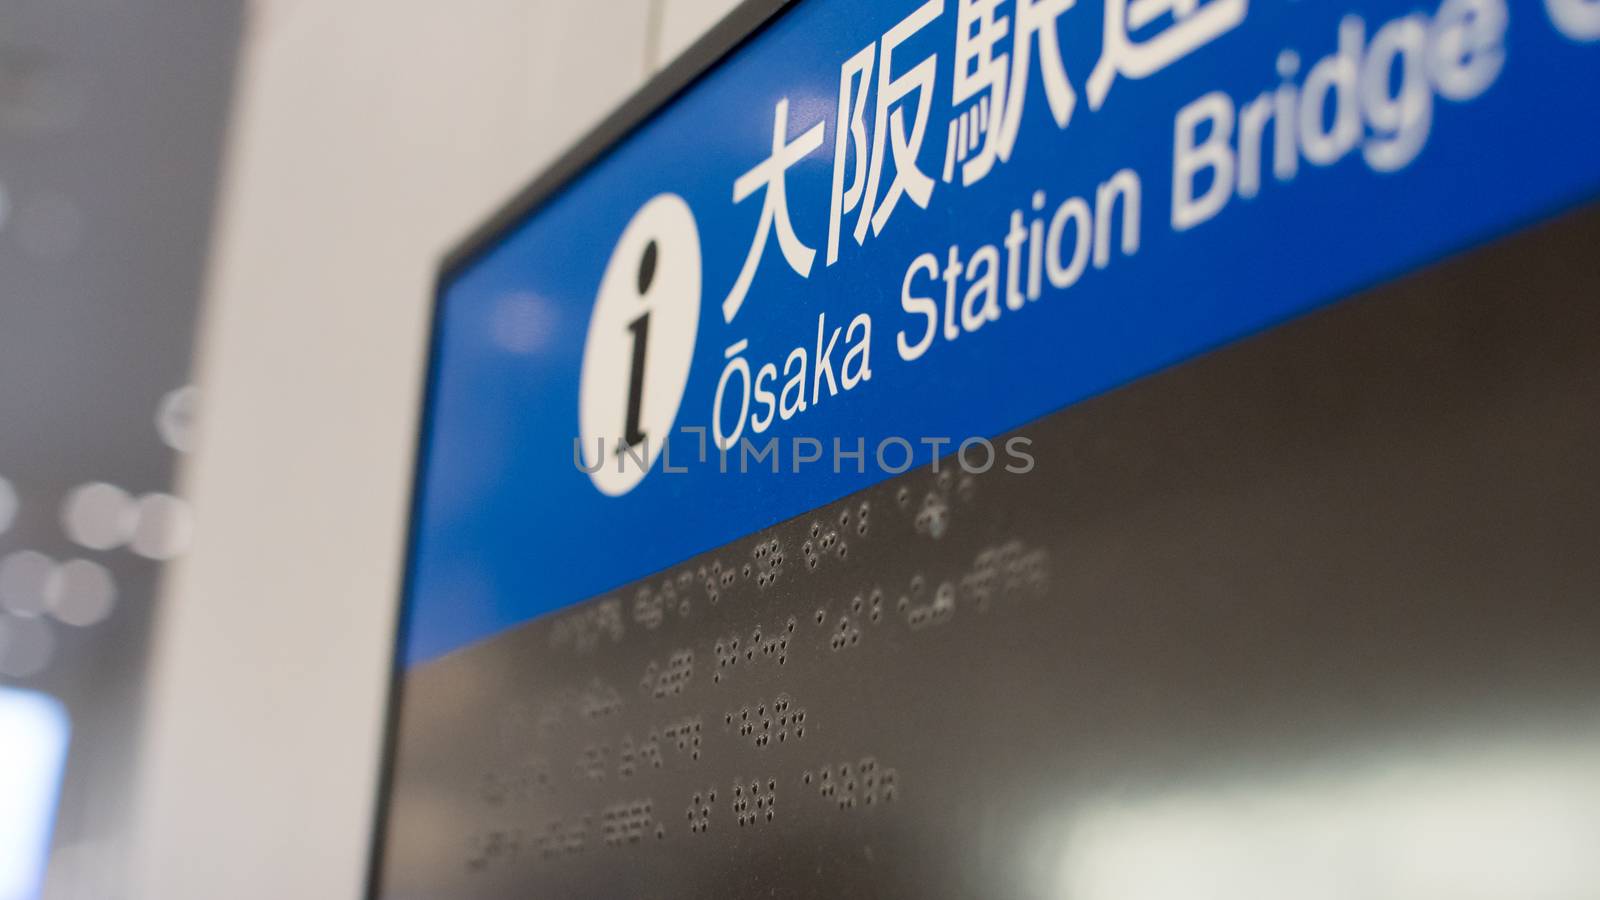 Braille letters and words in Osaka Station, perfect way for blind people to orientate